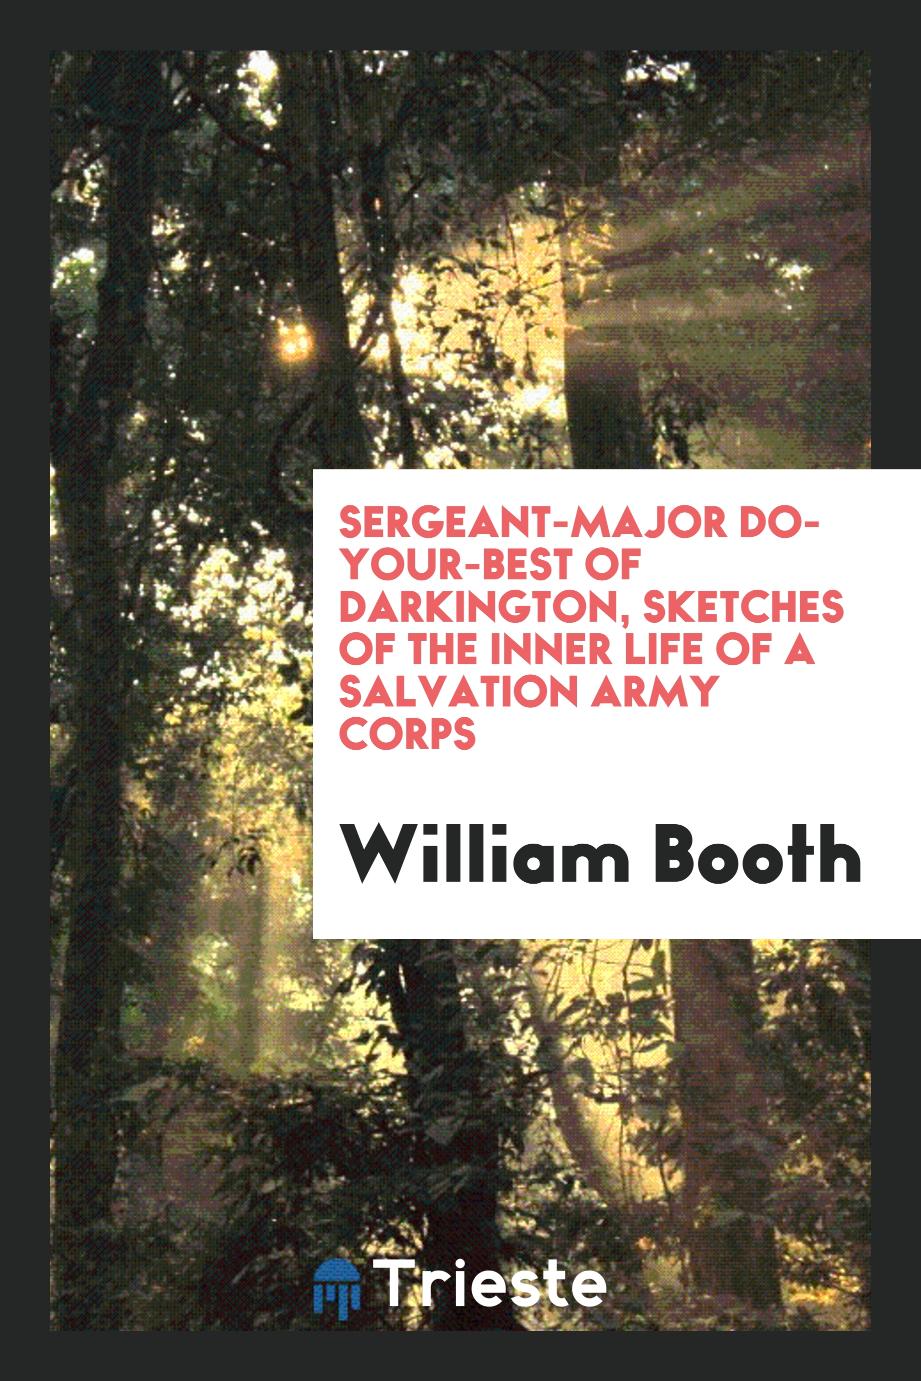 Sergeant-Major Do-Your-Best of Darkington, Sketches of the Inner Life of a Salvation Army Corps